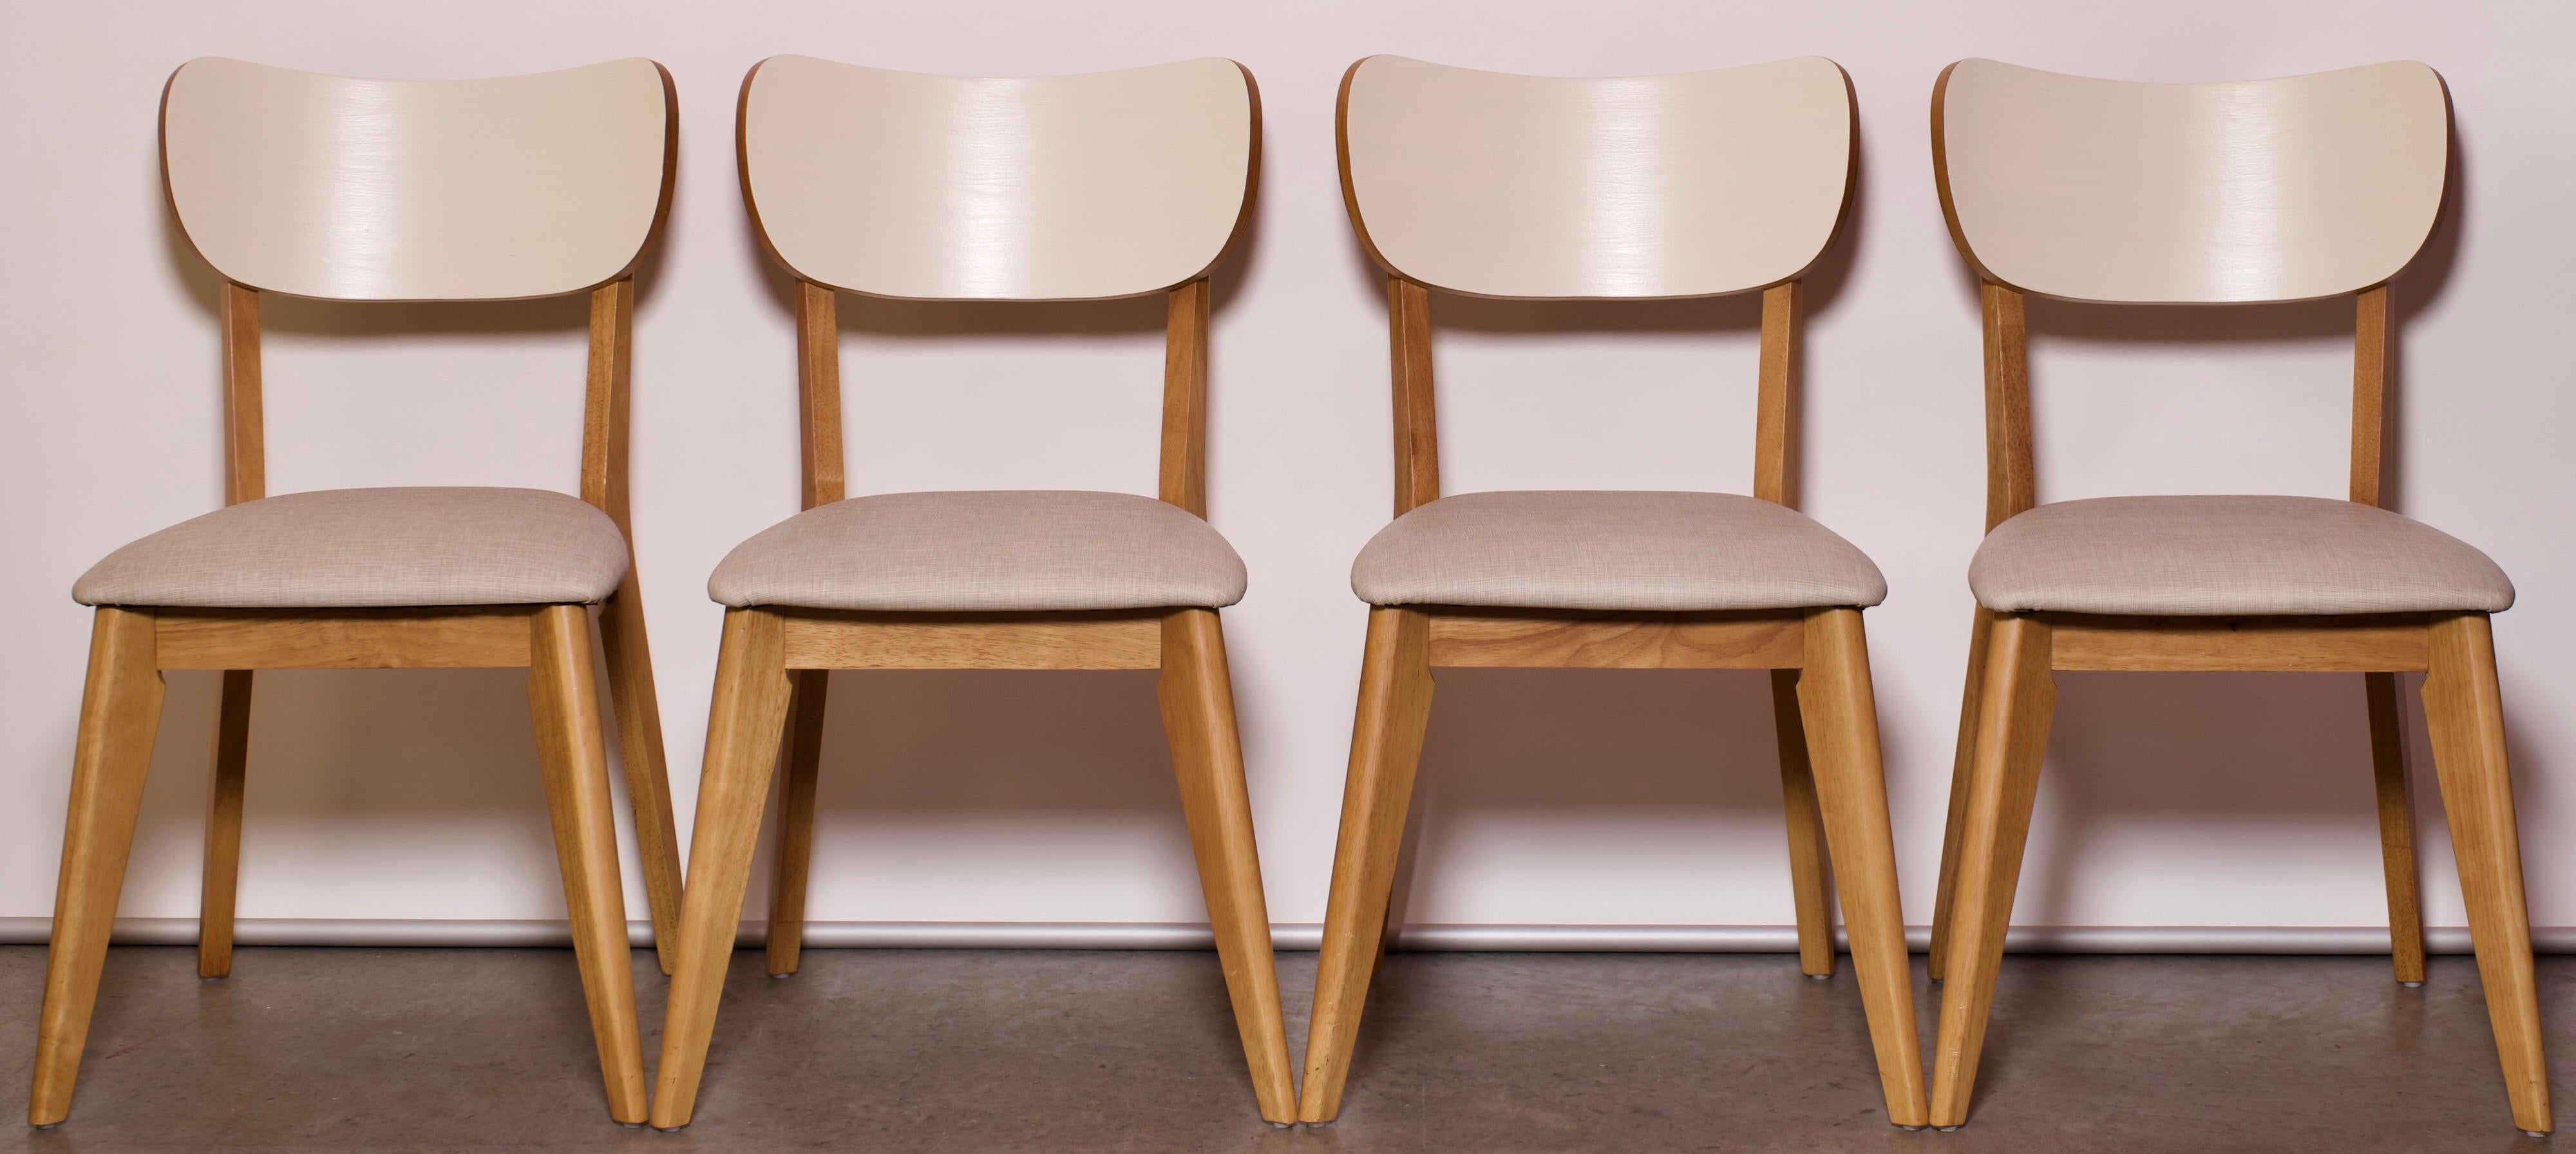 1960s Vintage Contemporary Birch and Vinyl Dining Chairs, Set of 4 6